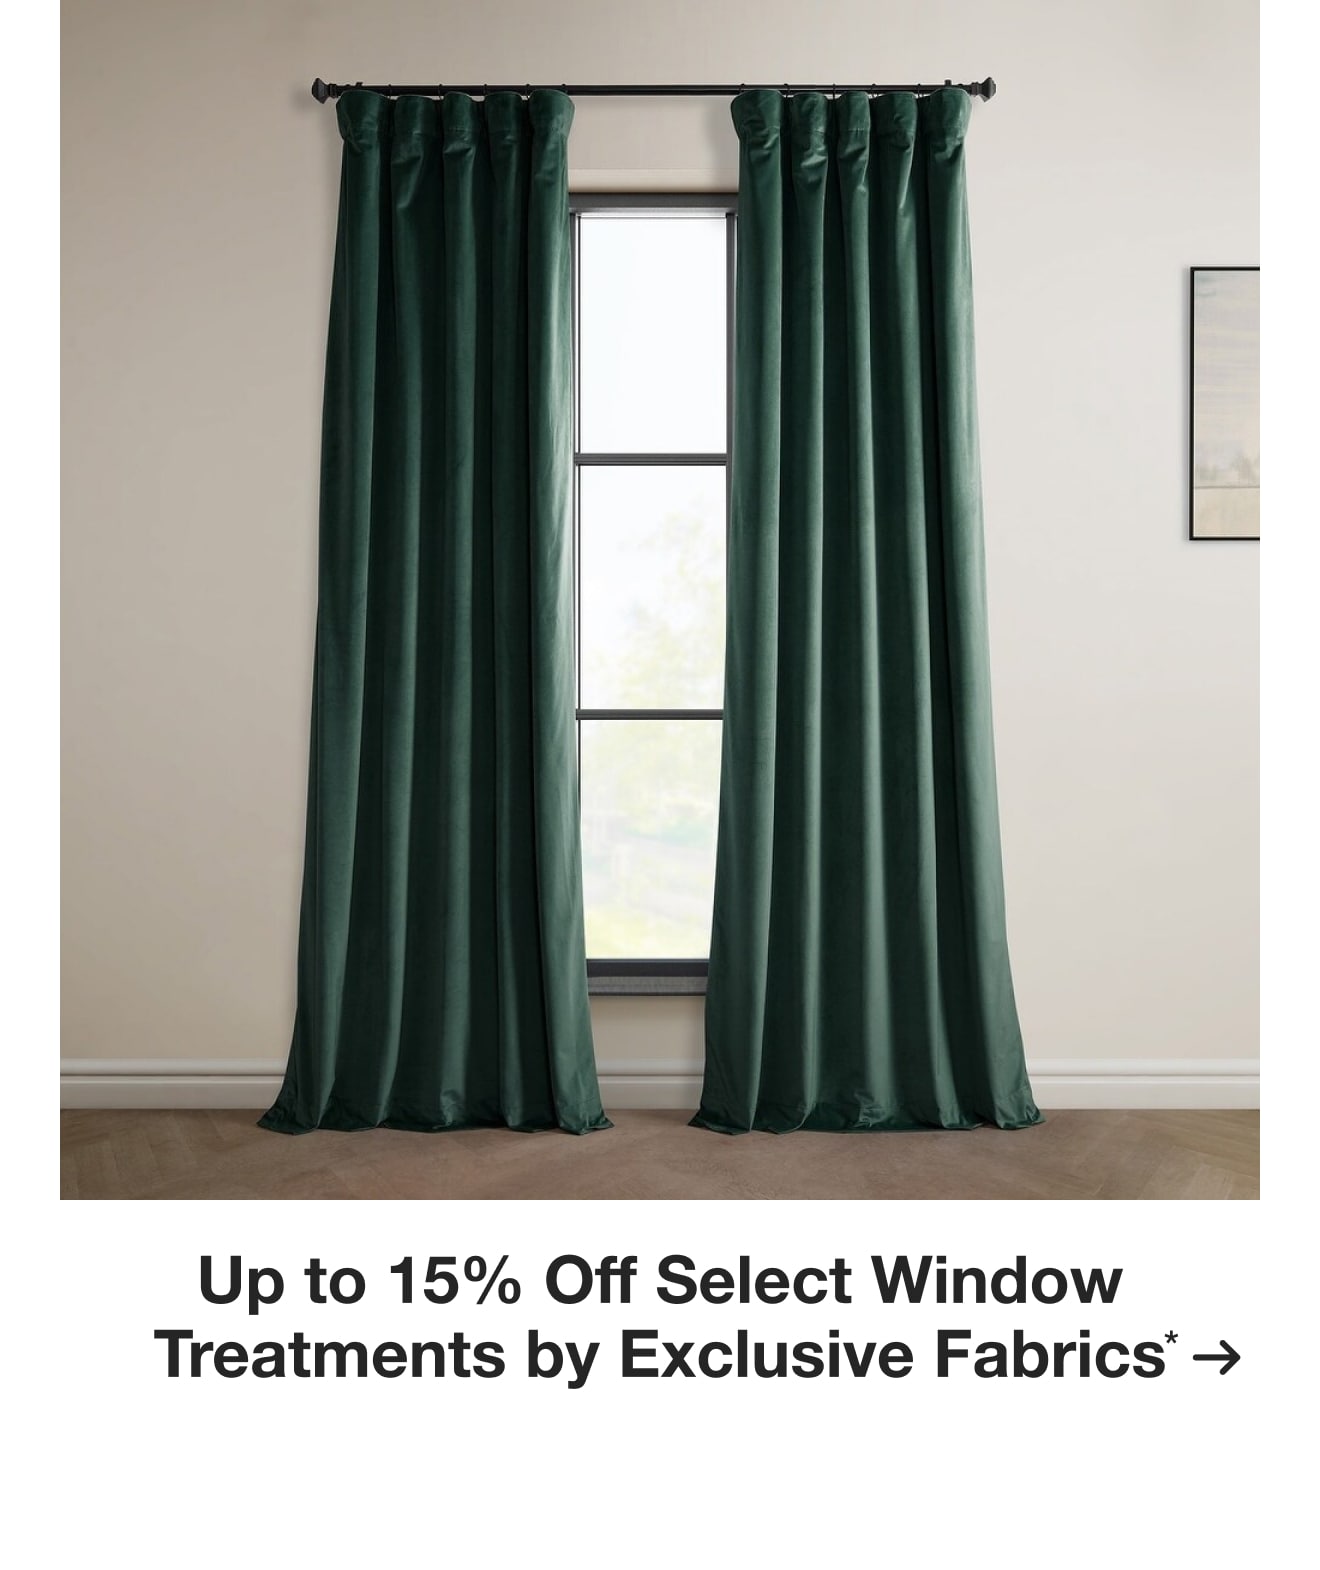 Up to 15% Off Select Window Treatments by Exclusive Fabrics*